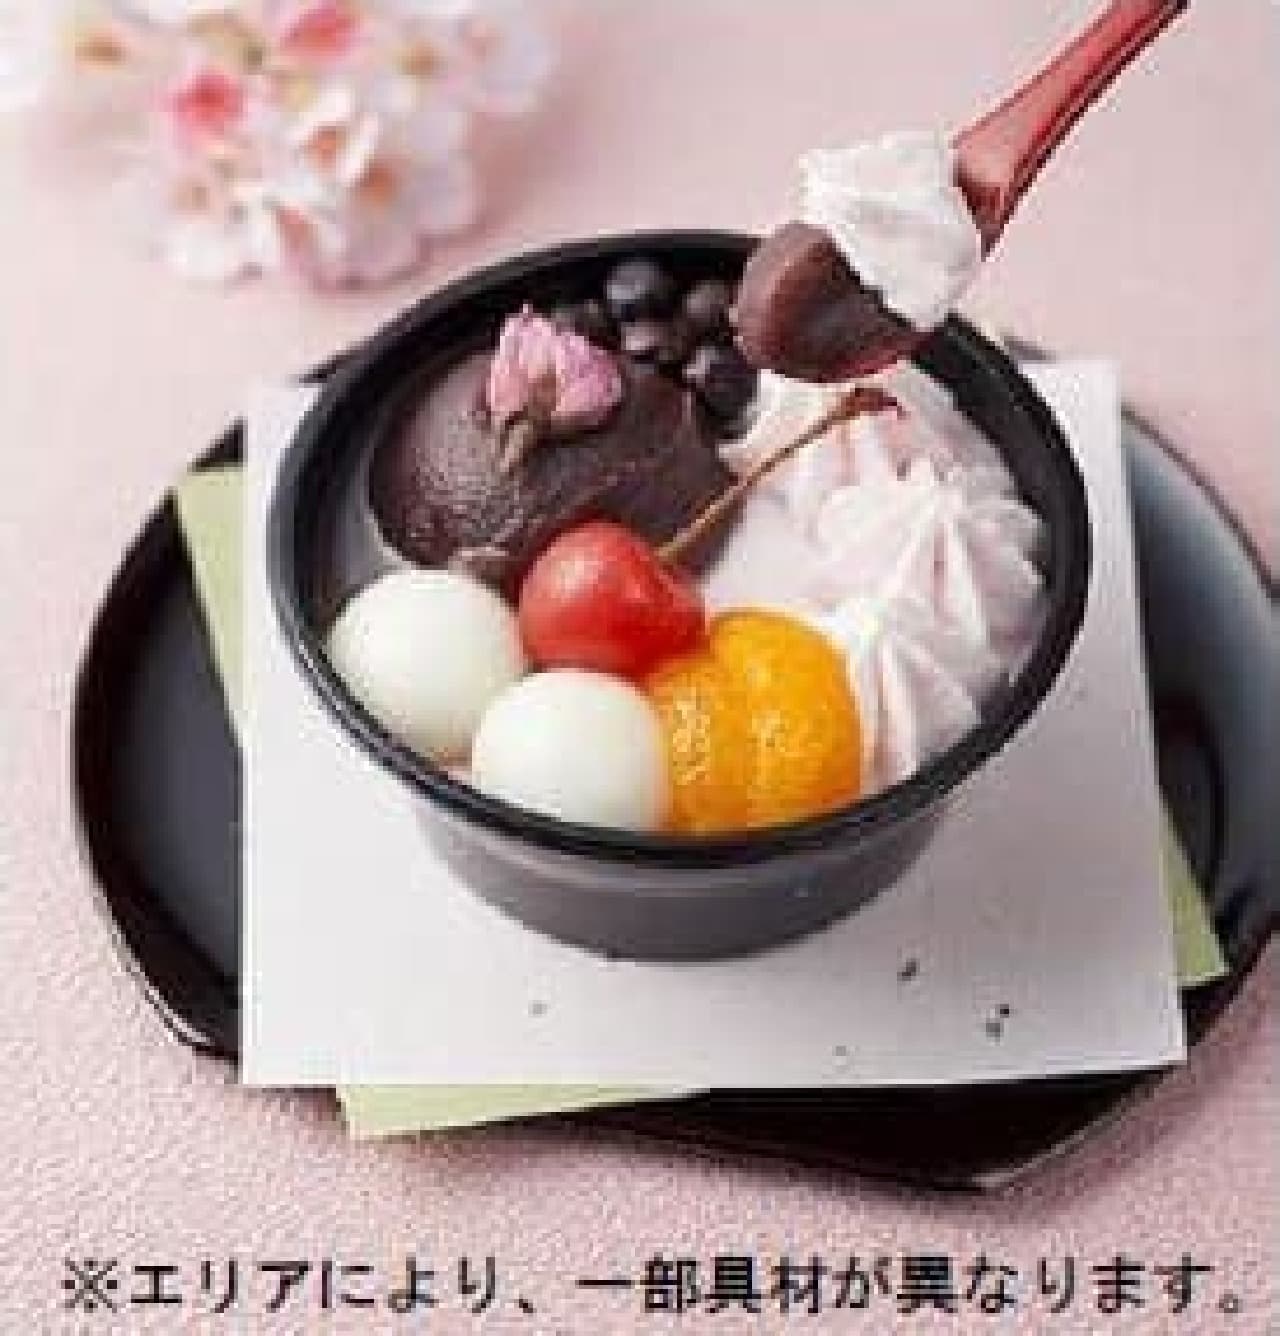 A spring-like dish made with parfait